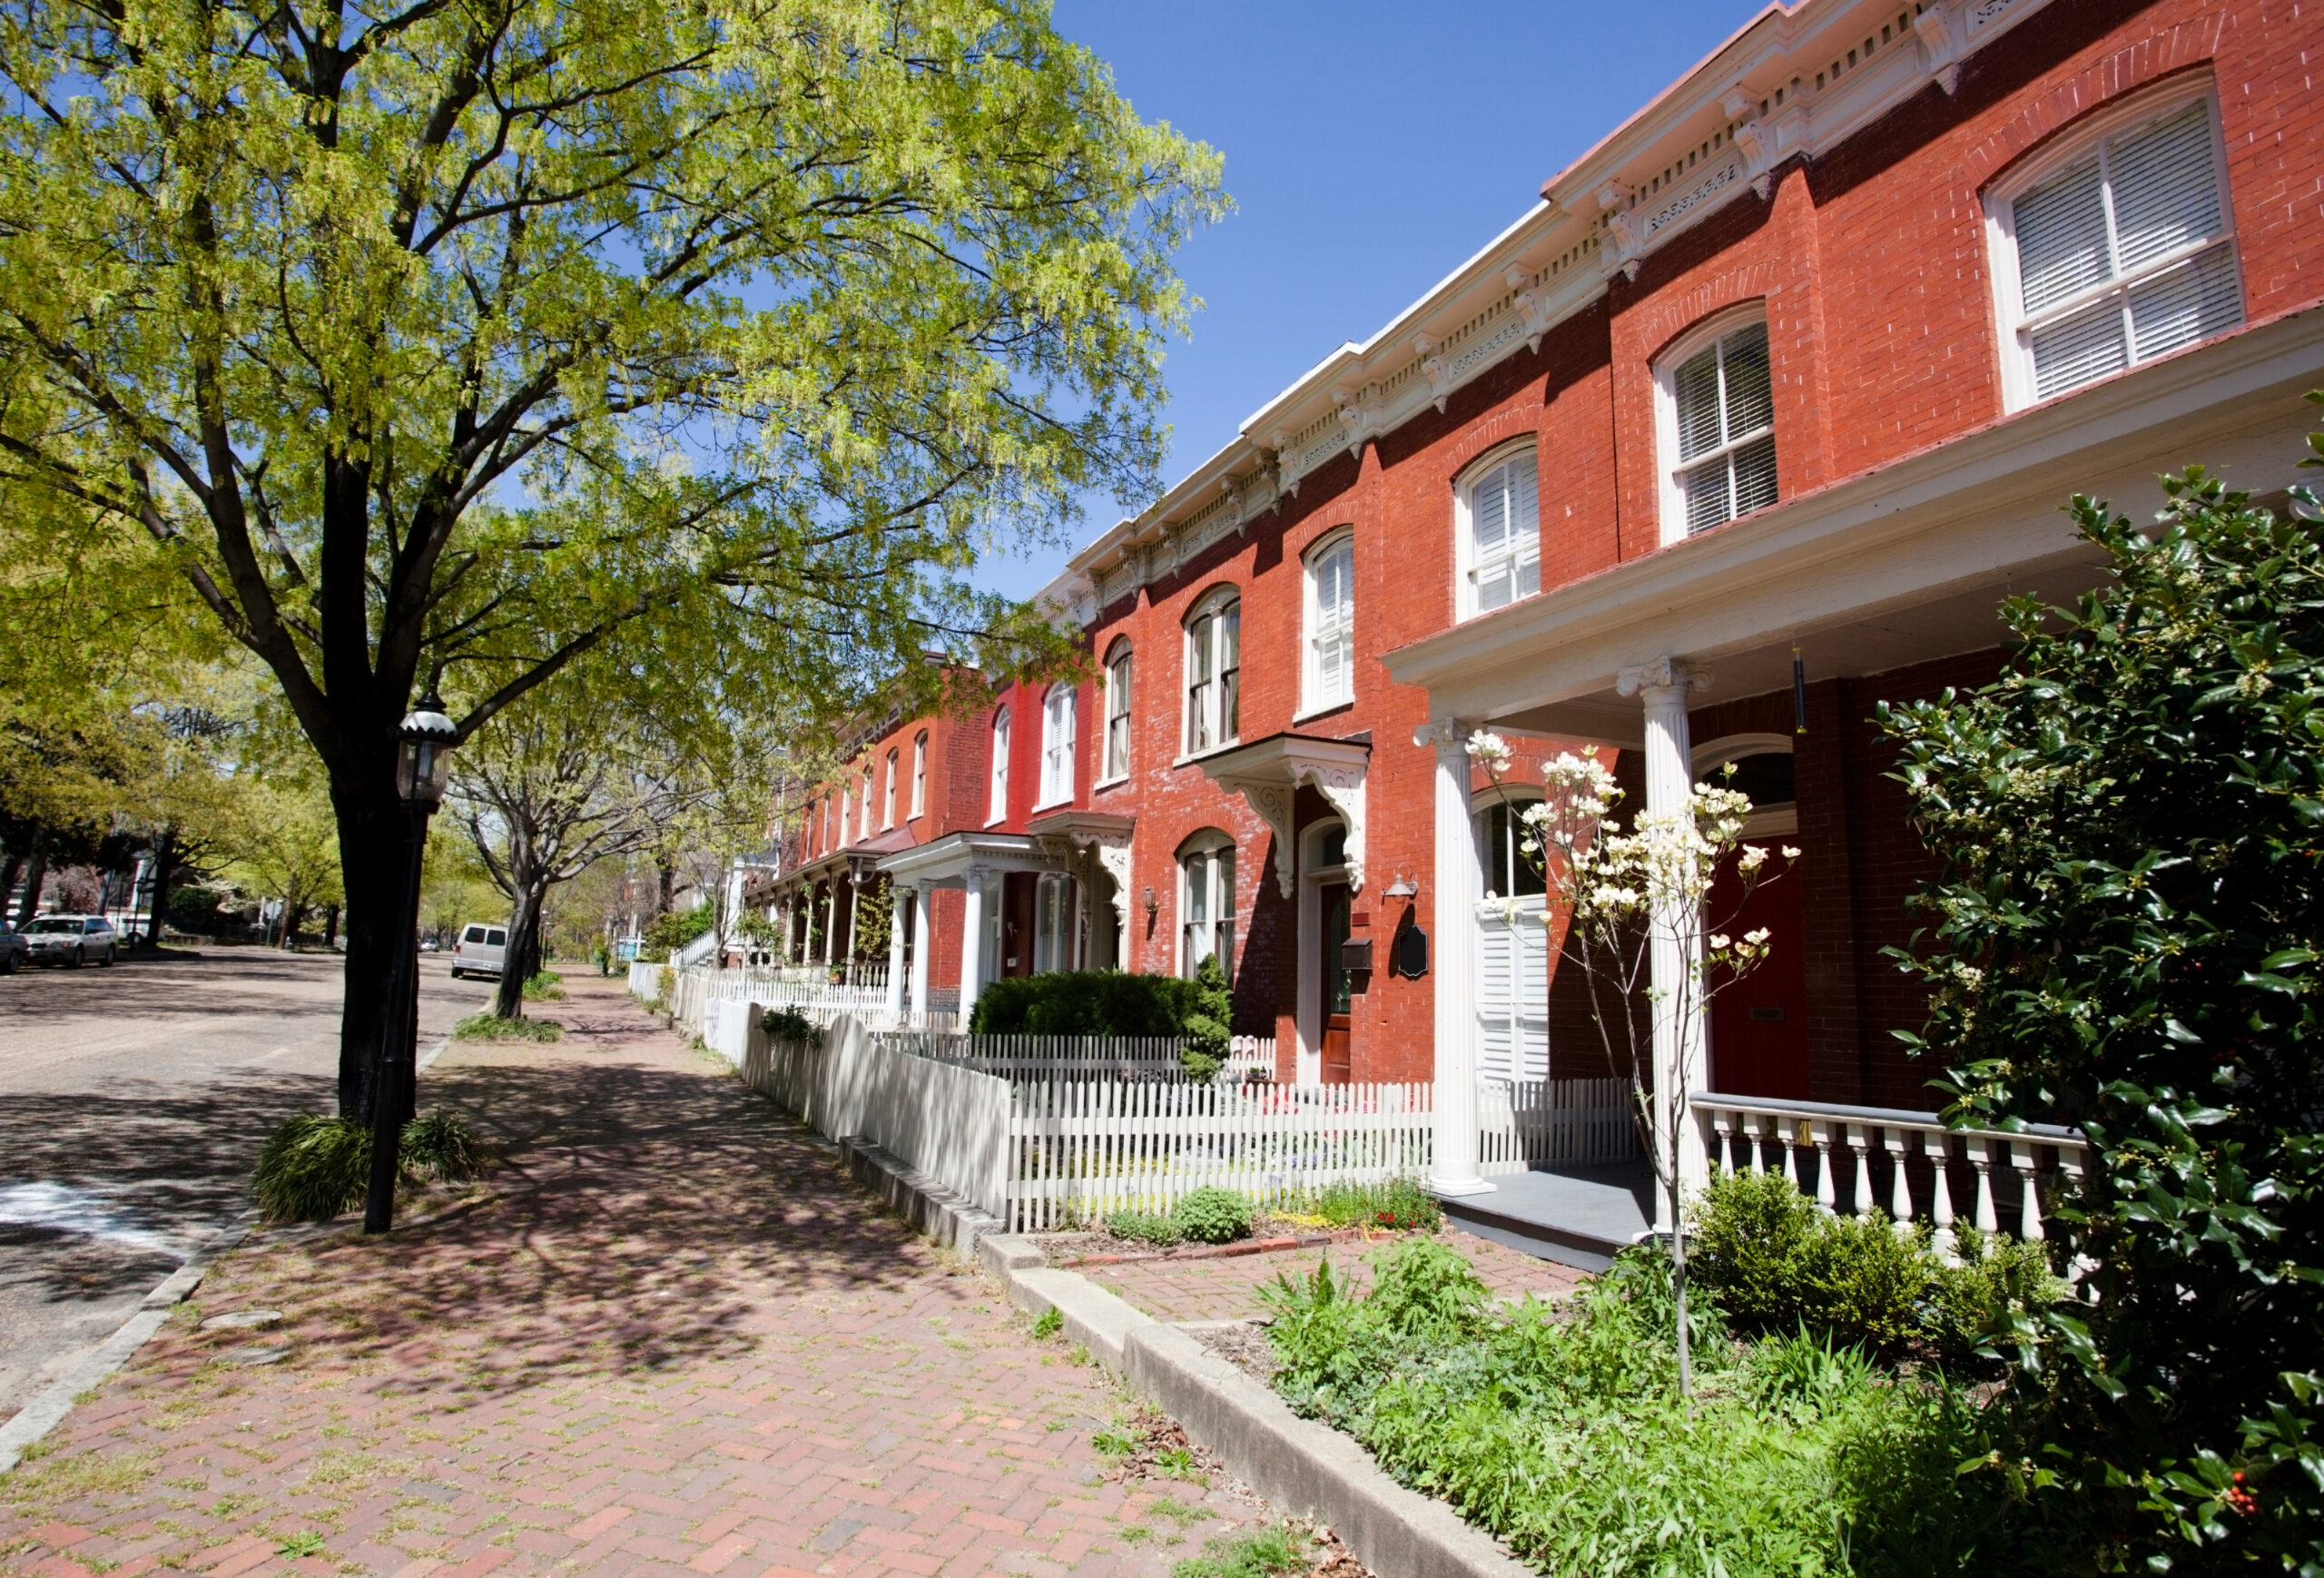 Row houses in Richmond, Virginia with some natural shade from trees.